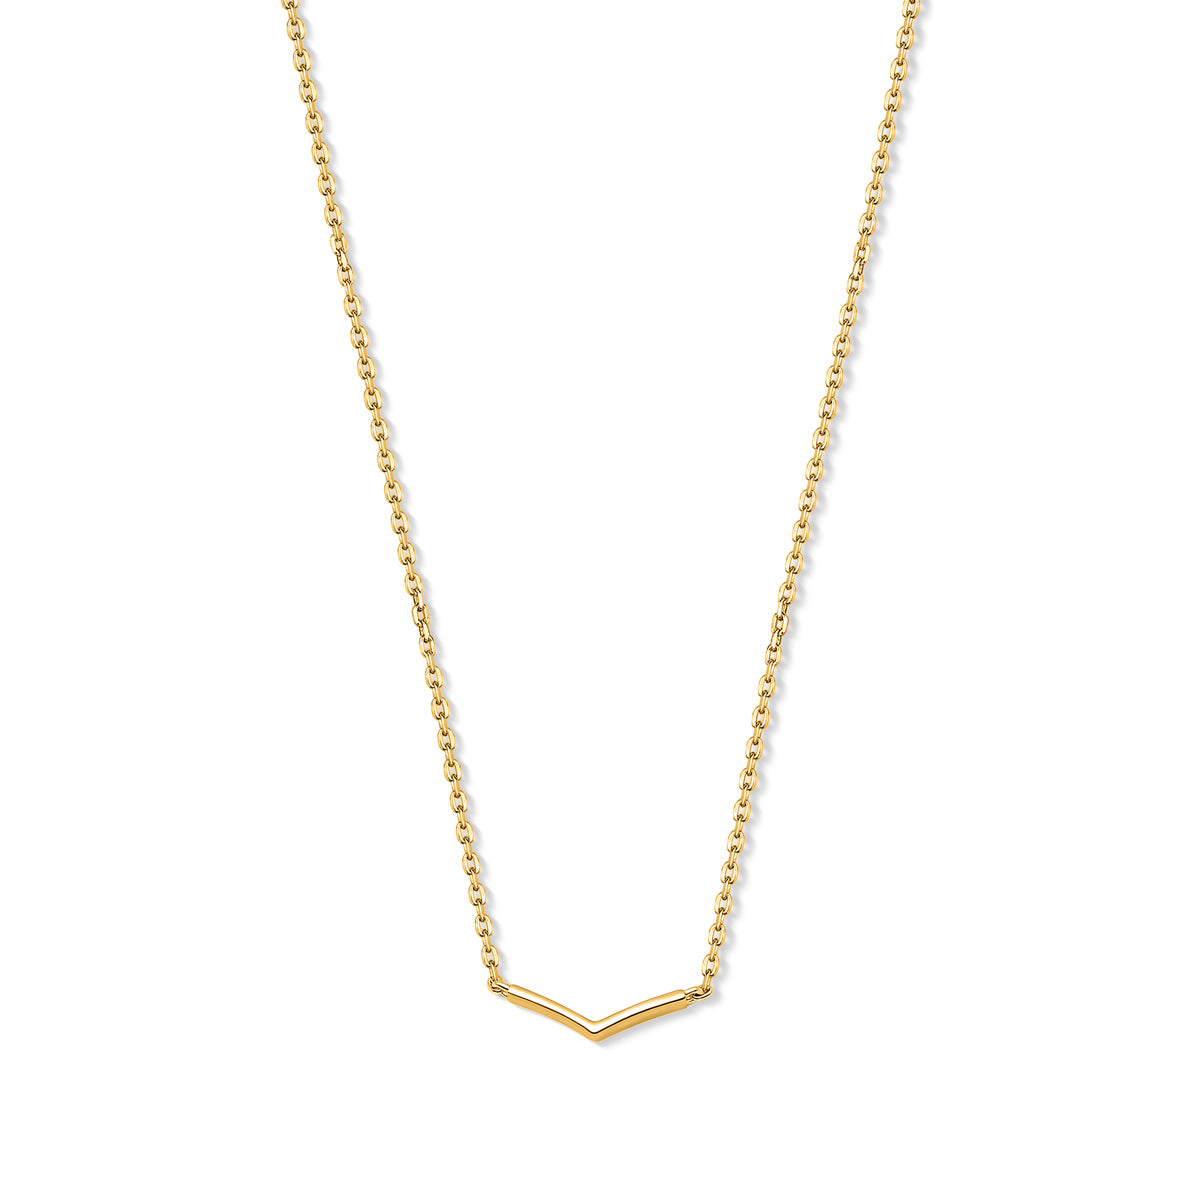 Dainty gold plated v shaped necklace